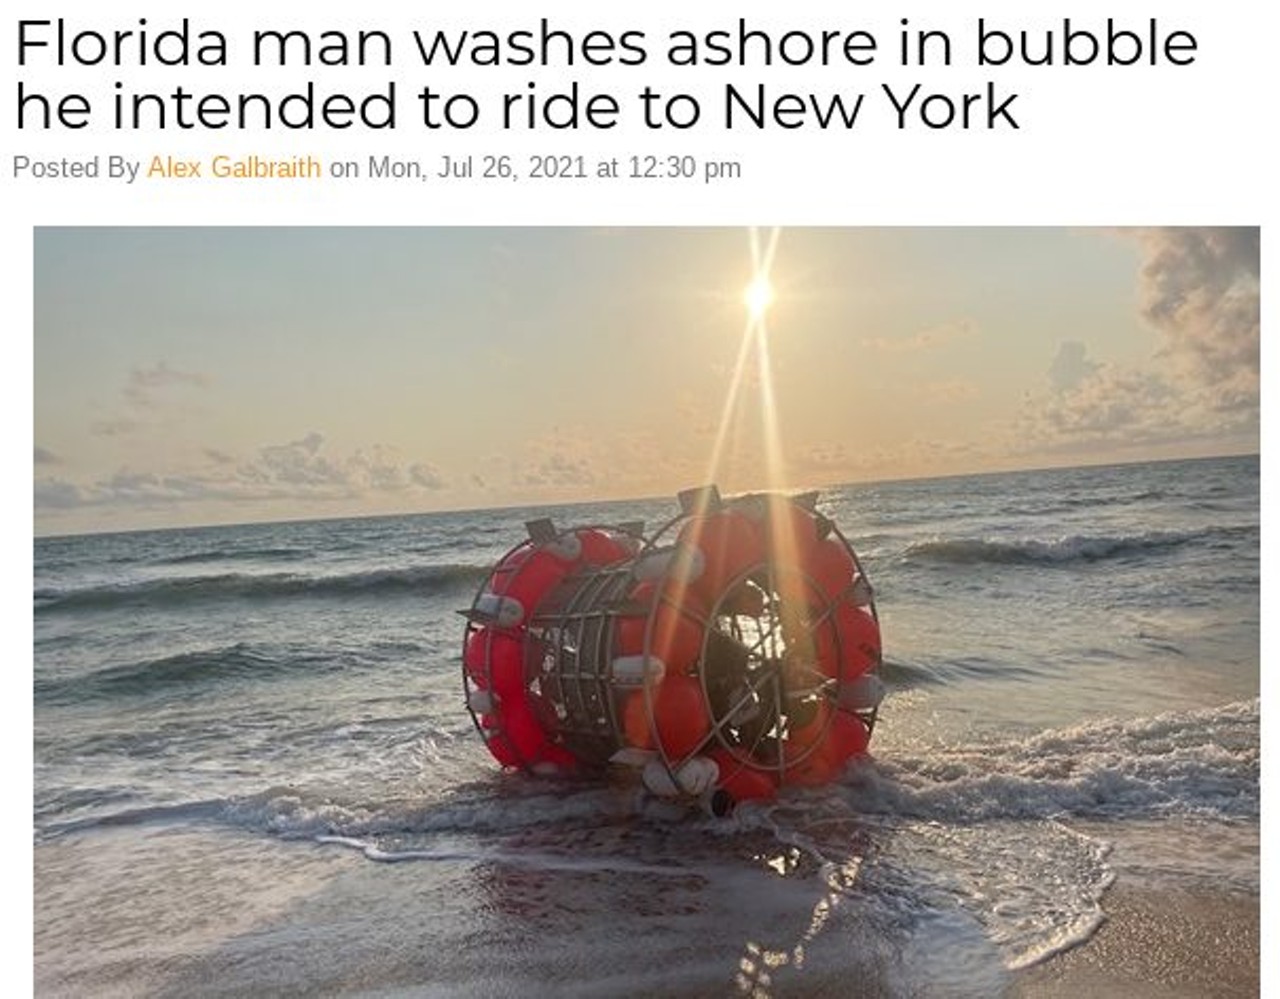 Florida man washes ashore in bubble he intended to ride to New York
